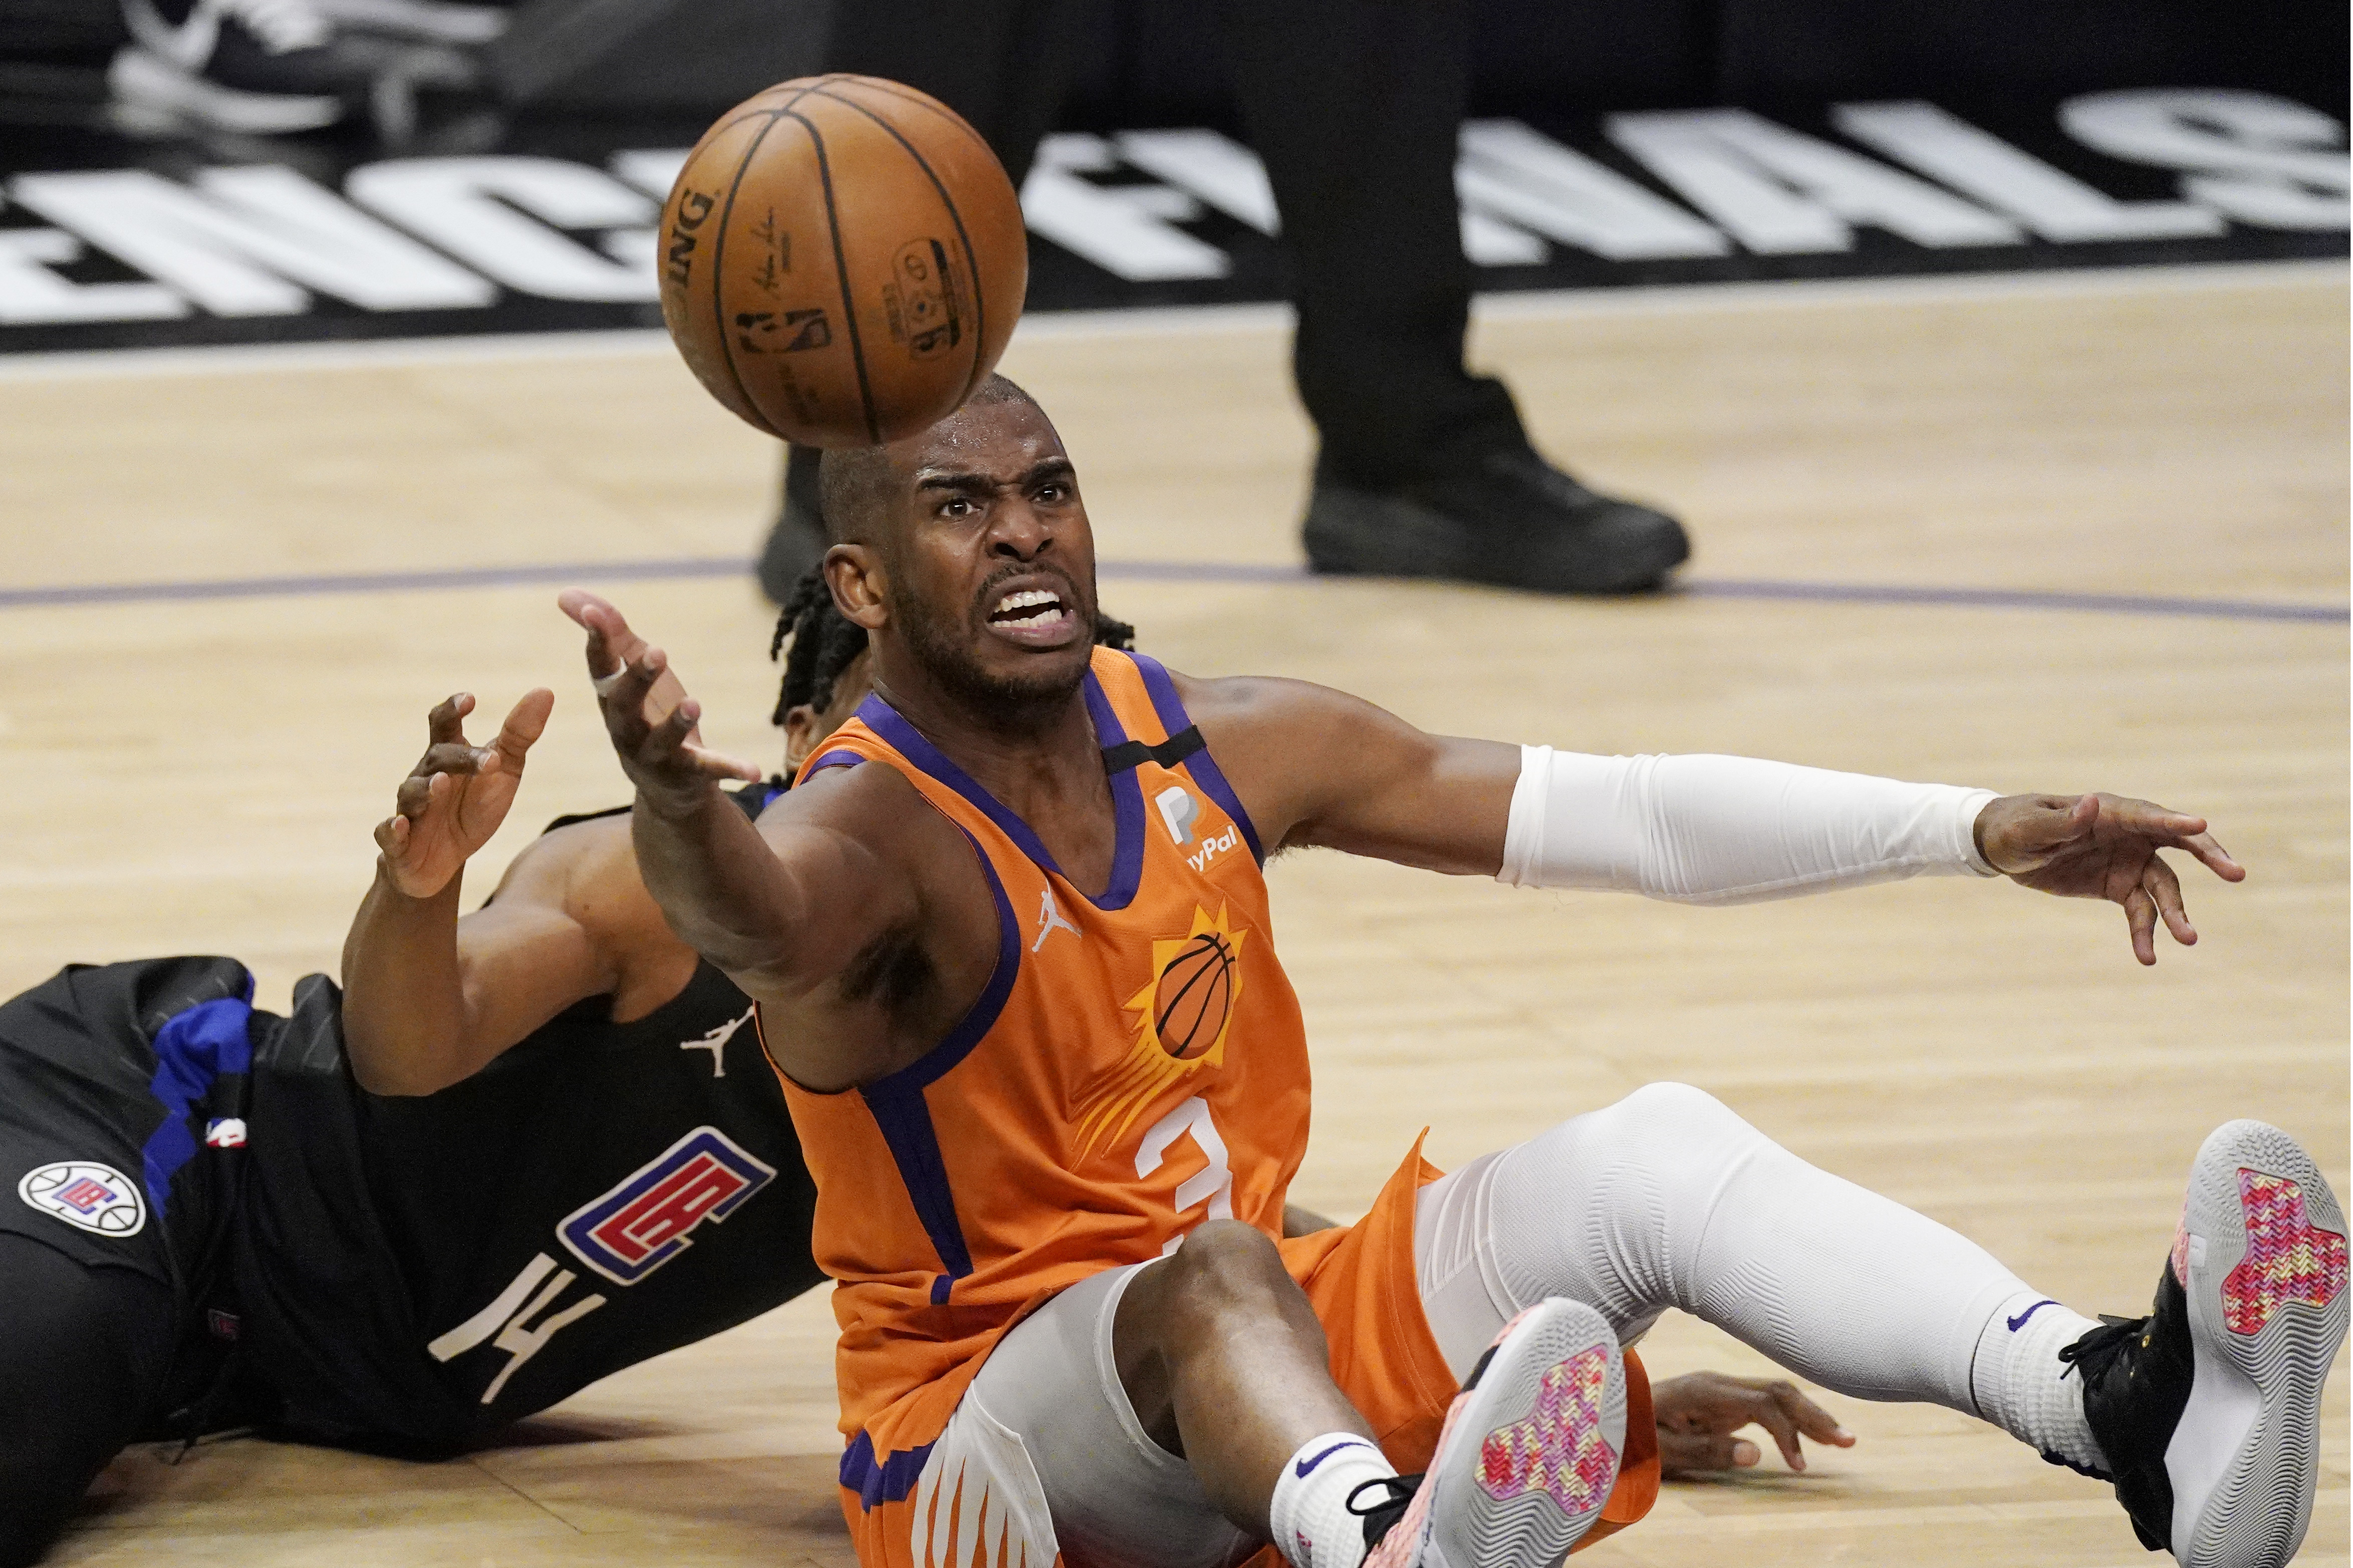 Chris Paul, Players Association working with NBA to allow messages